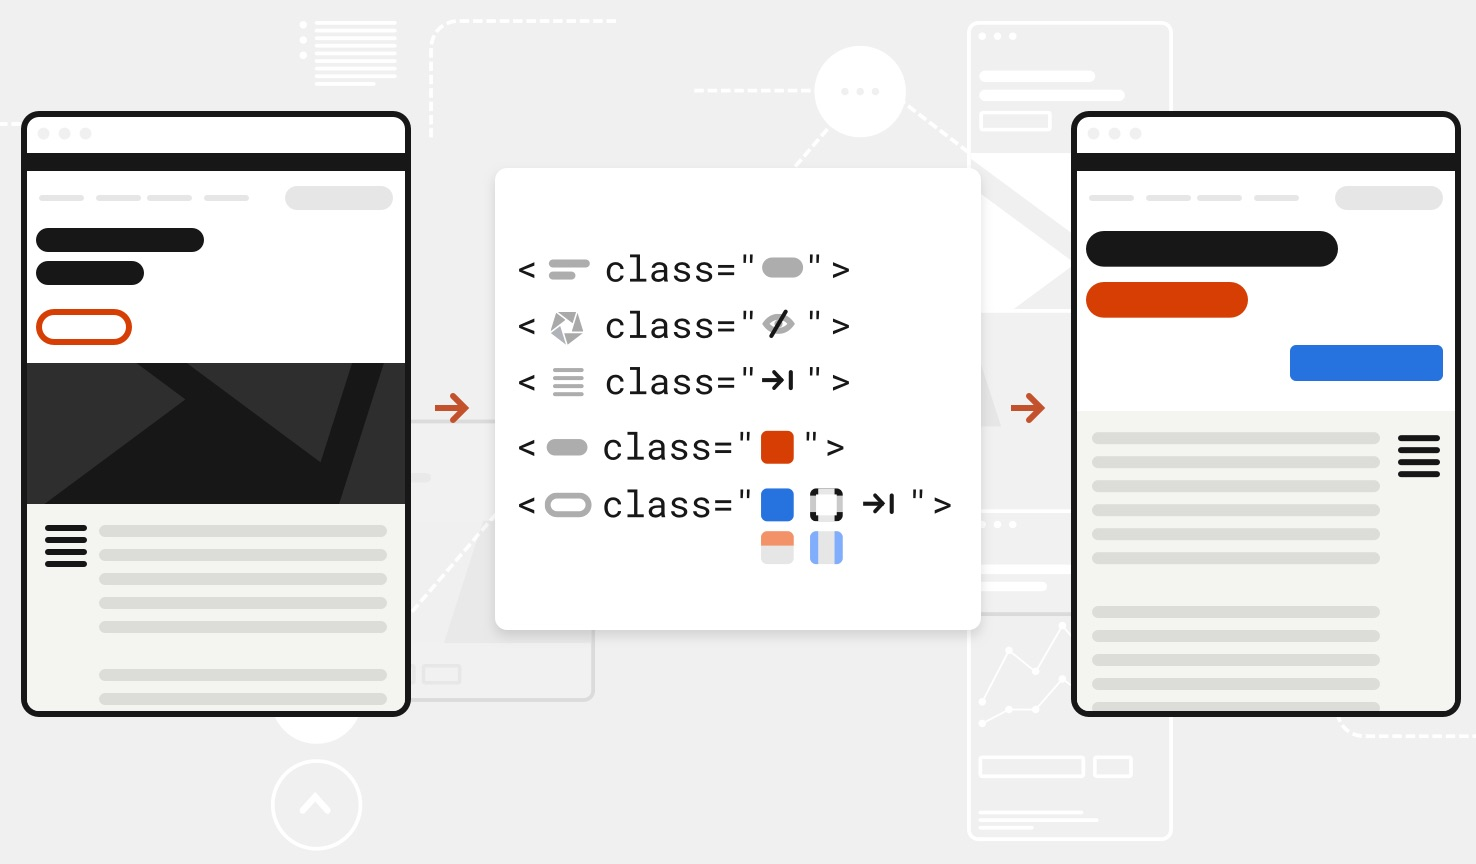 This illustration shows another before-and-after example of how a website can use utility classes to change the styles of site elements. Five stylized examples of code are given below the two versions of the page